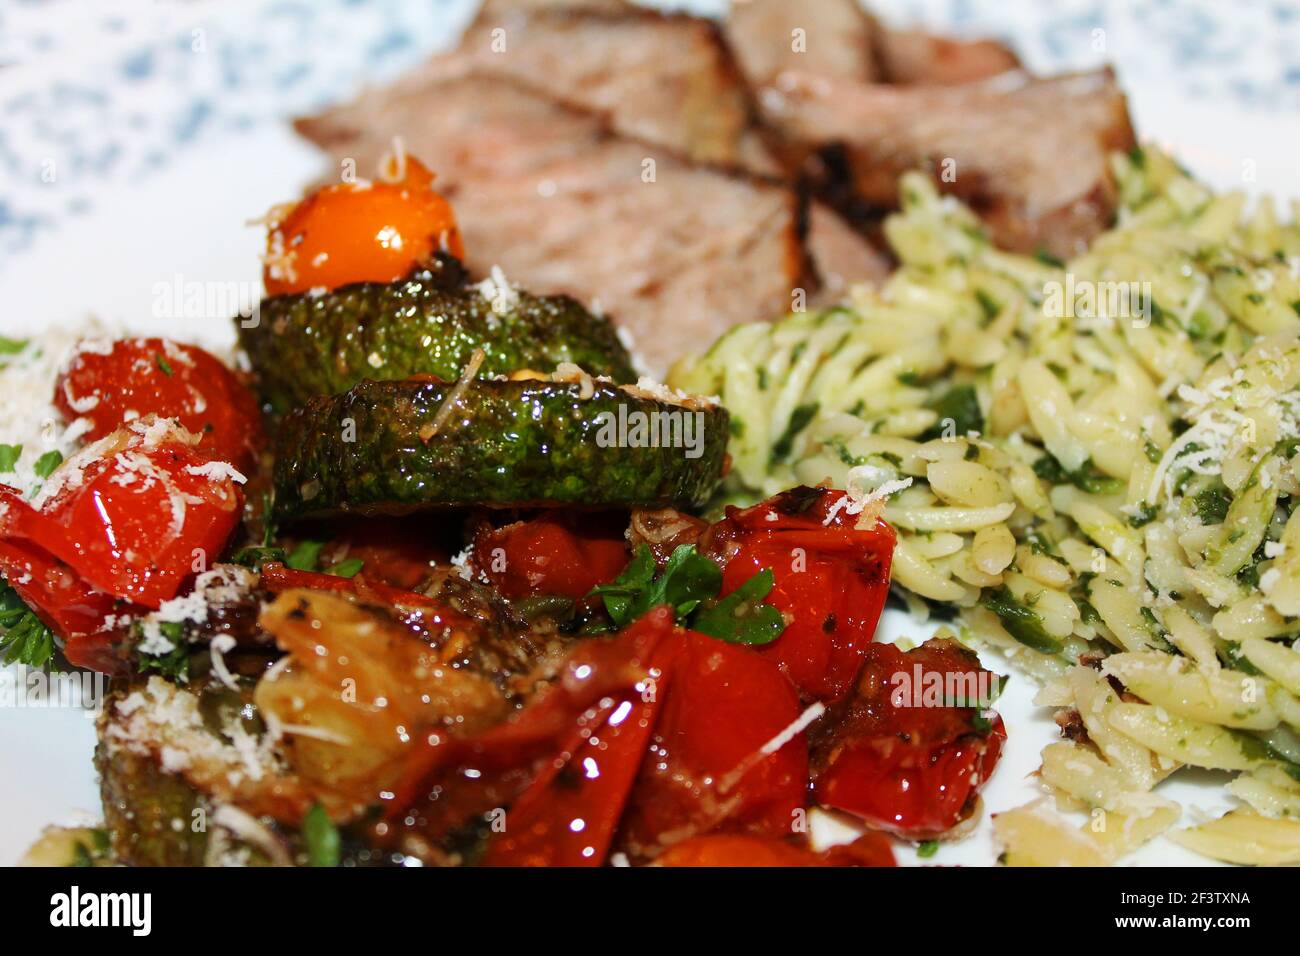 Close-up of a plate of fried cherry tomatoes and fried zucchini with basmati rice, and sliced baked pork, out of focus in background. Stock Photo